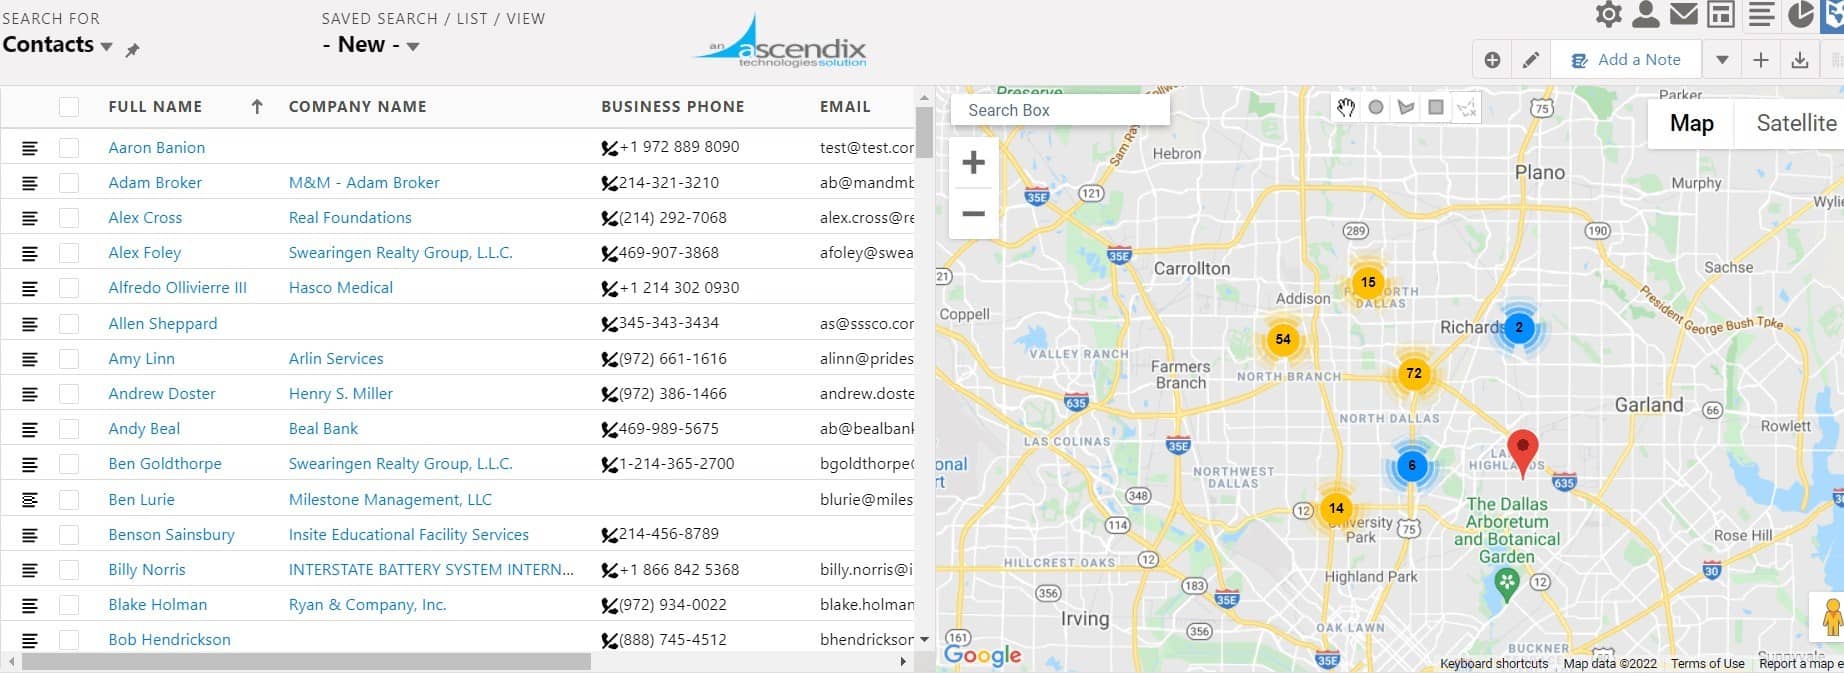 Radius Search for Contacts within 5 miles from selected Company | Ascendix Search